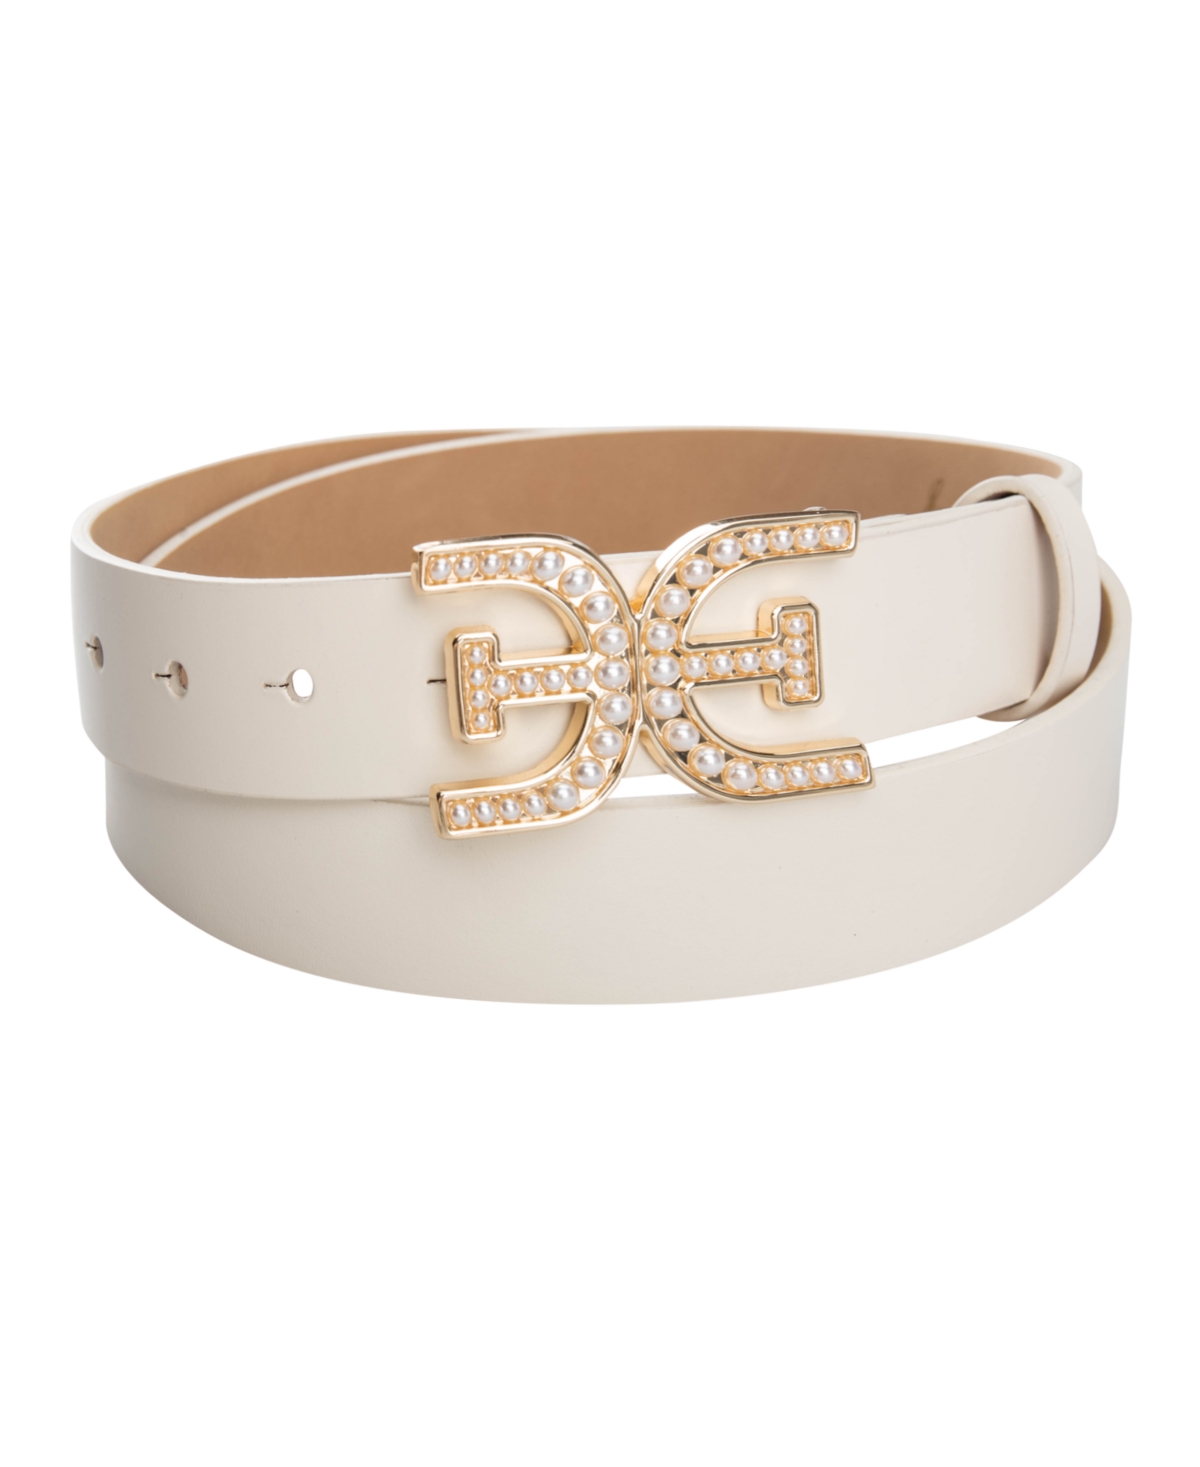 Sam Edelman Women's Imitated Pearl Embellished Double-e Plaque Buckle Belt In Ivory